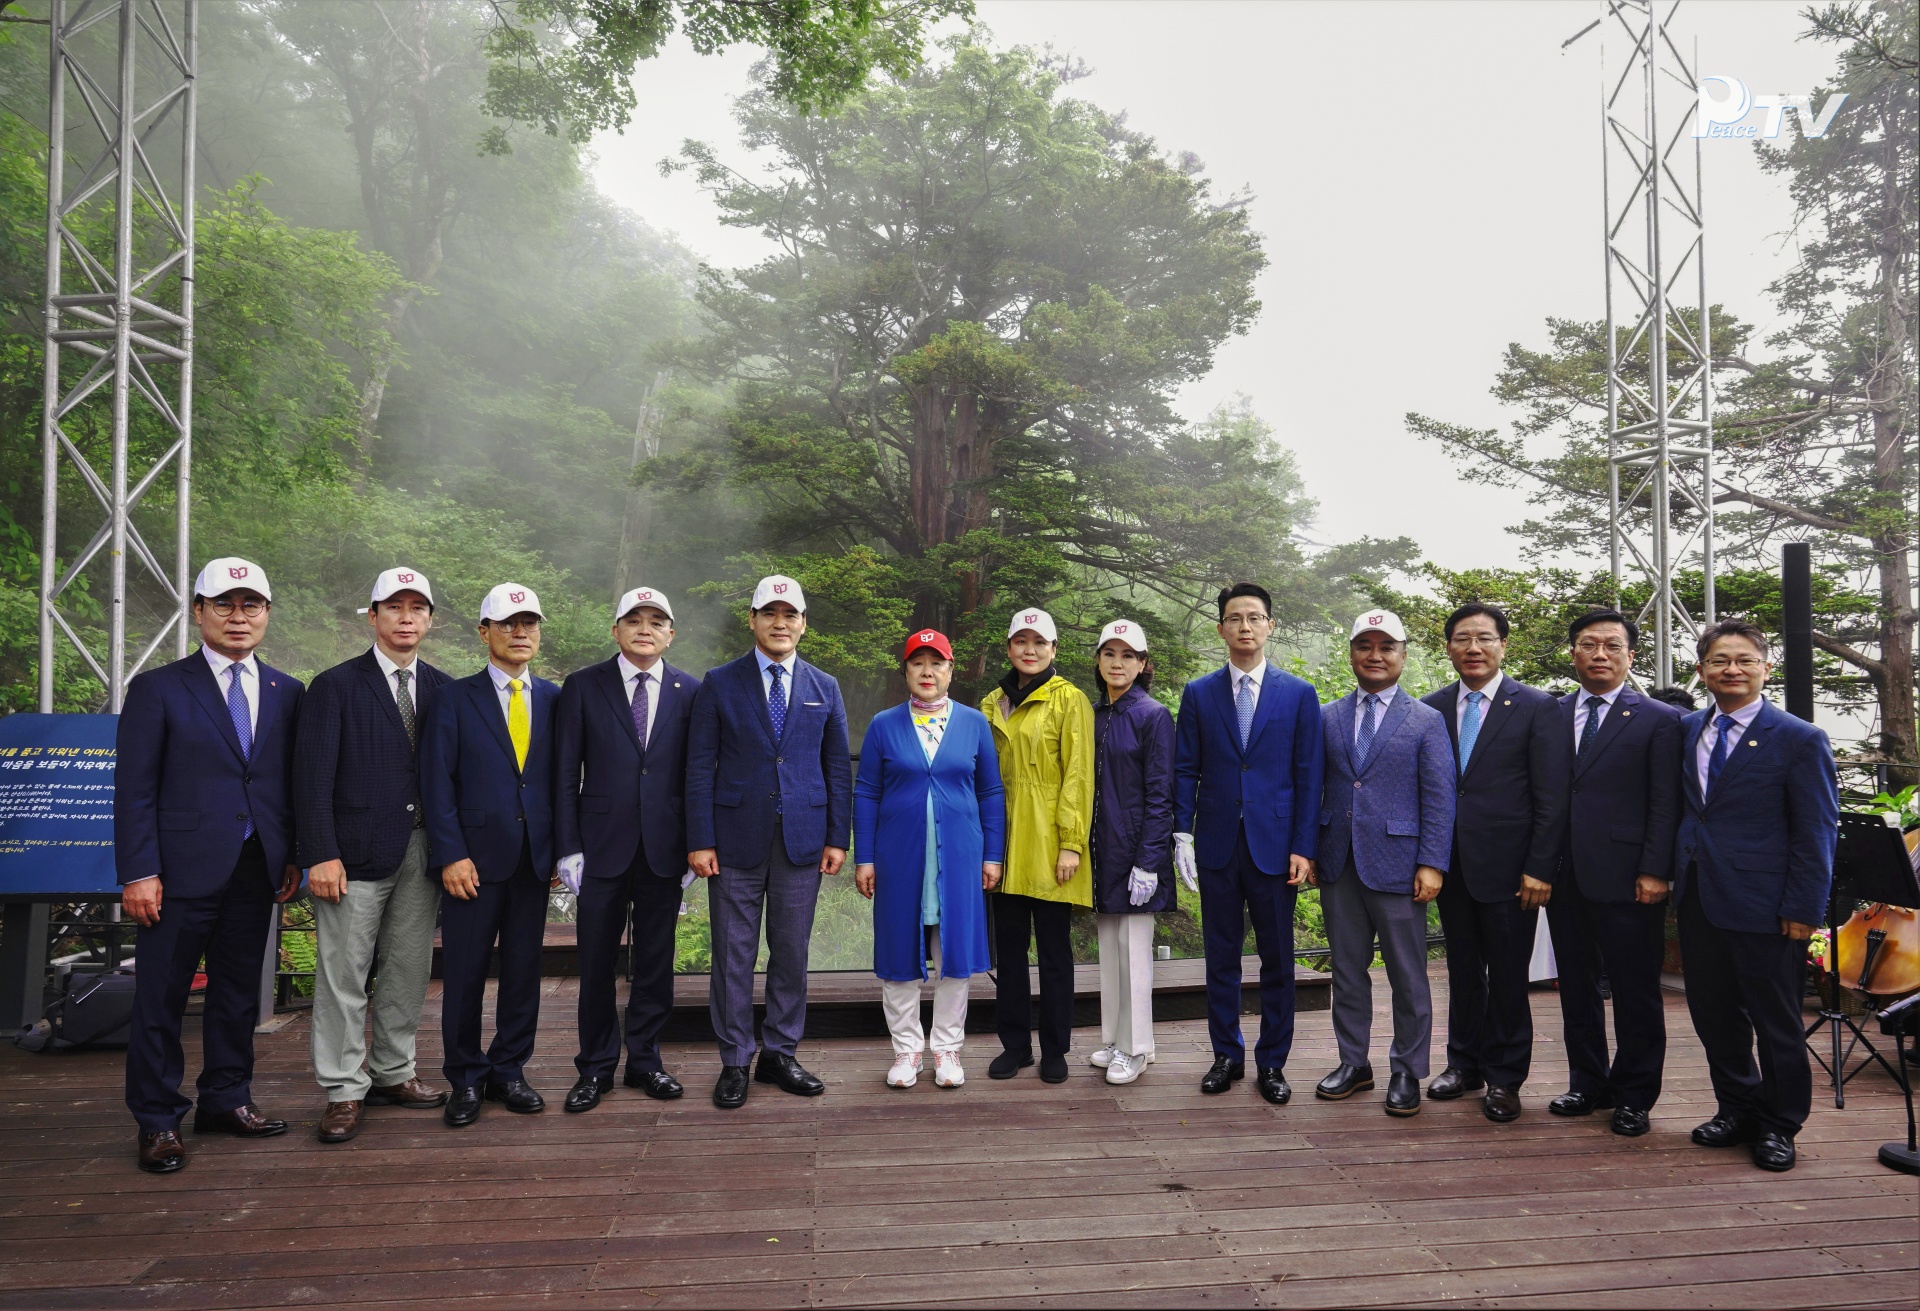 Dedication of a Trail Across a Thousand-Year-Old Yew Grove at Mount Balwang HJ Mona Park, True Mother's Benediction   (June 13, 2022)